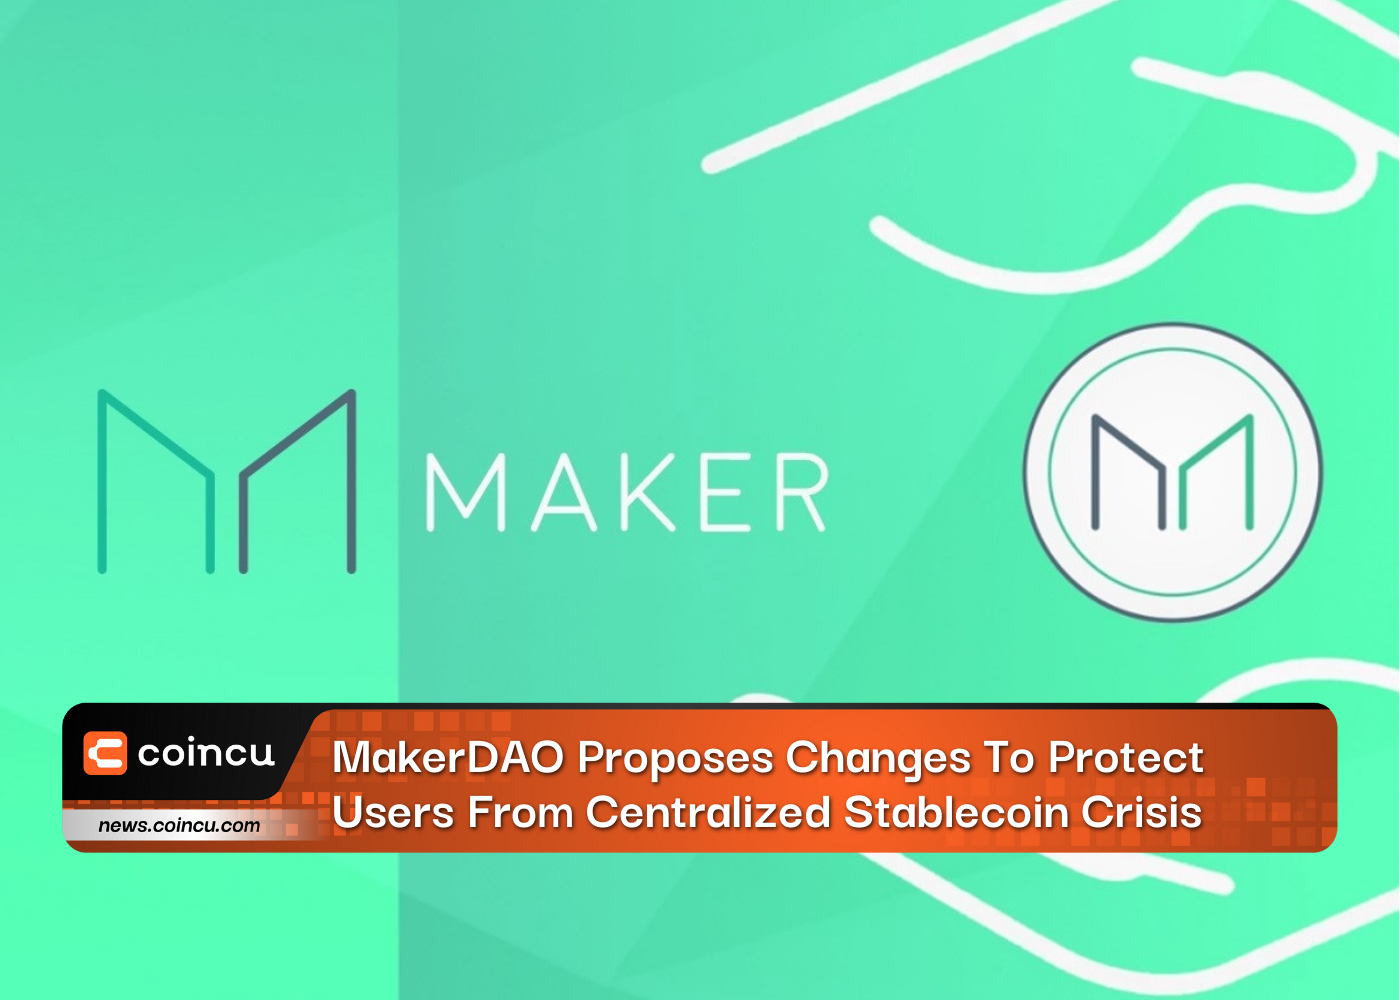 MakerDAO Proposes Changes To Protect Users From Centralized Stablecoin Crisis